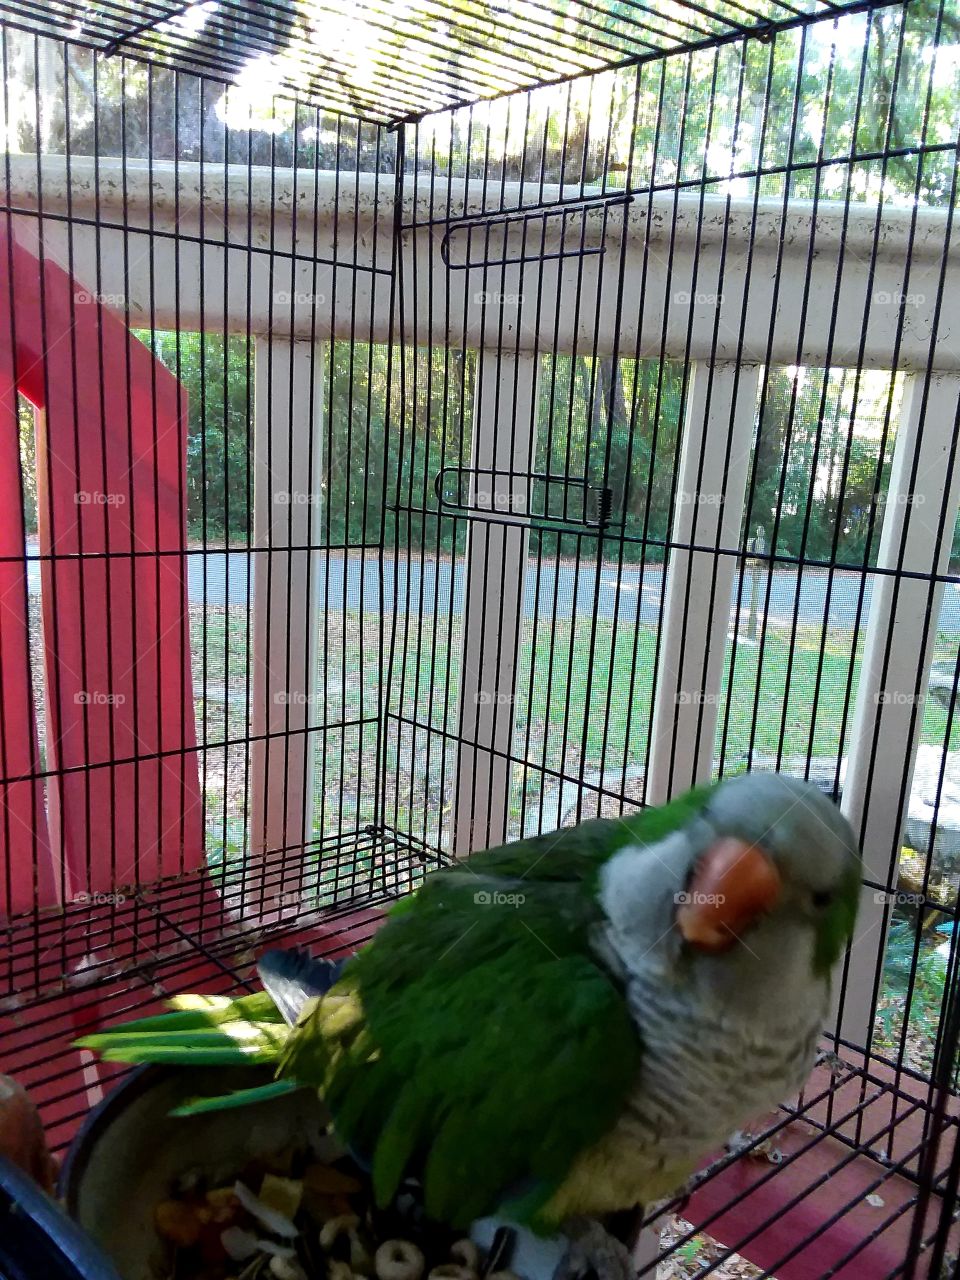 my parrot Kasey. He is a rescue and loves to laugh...and bite🤣